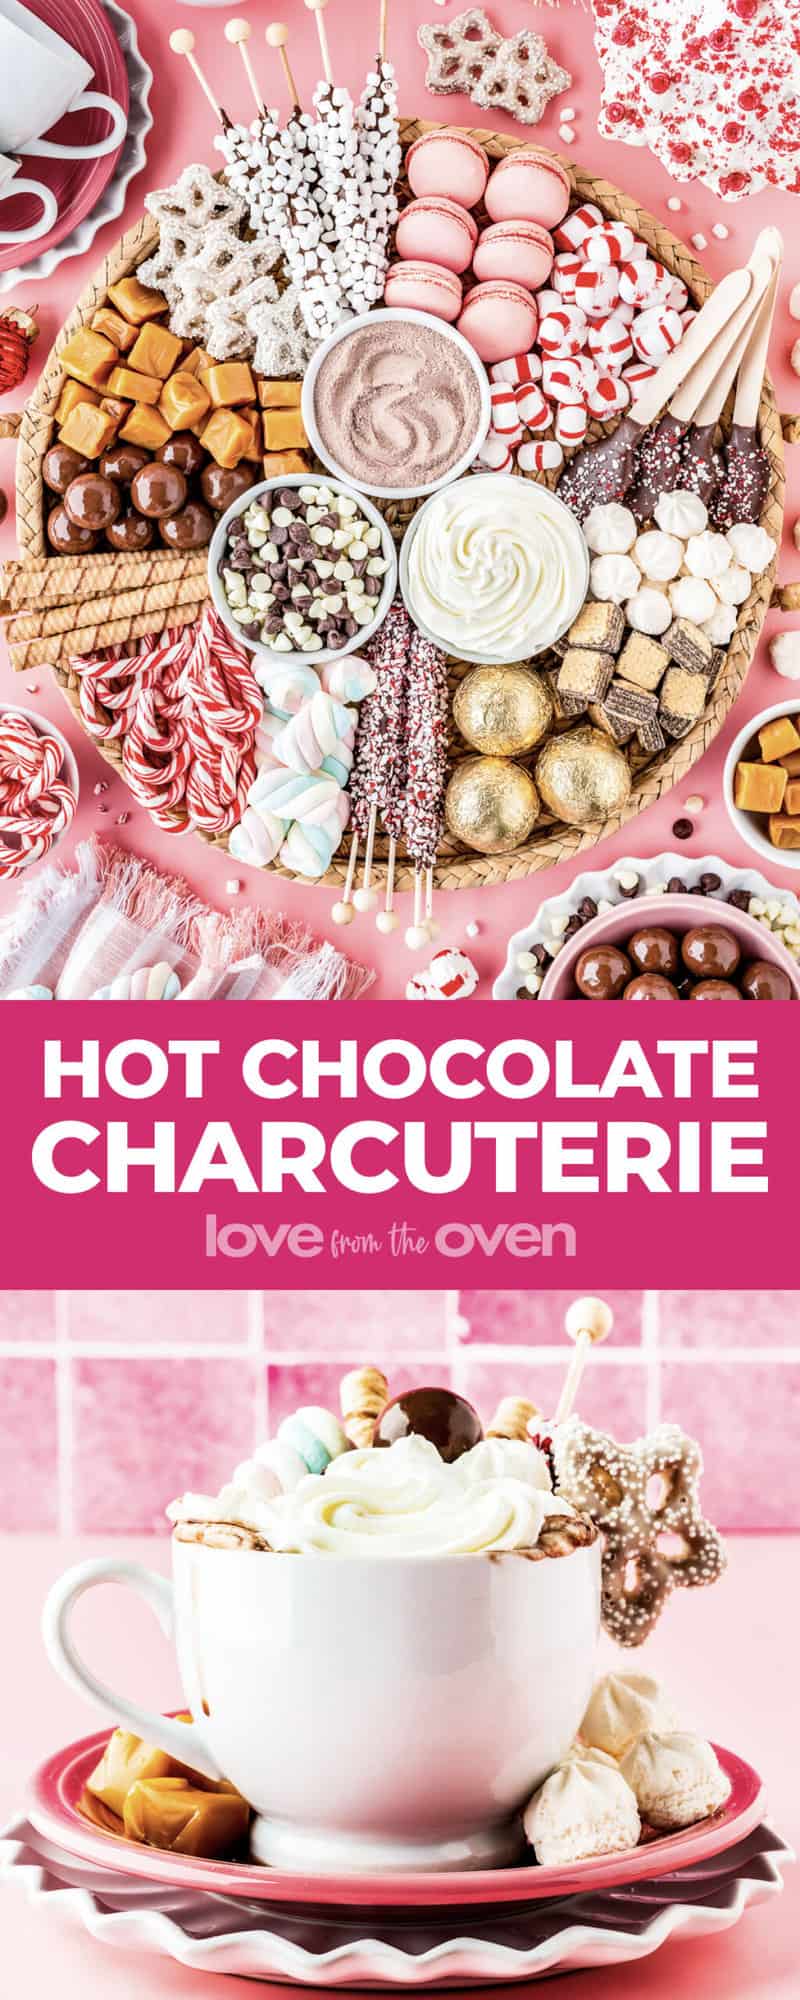 https://www.lovefromtheoven.com/wp-content/uploads/2022/11/hot-chocolate-charcuterie-scaled.jpg